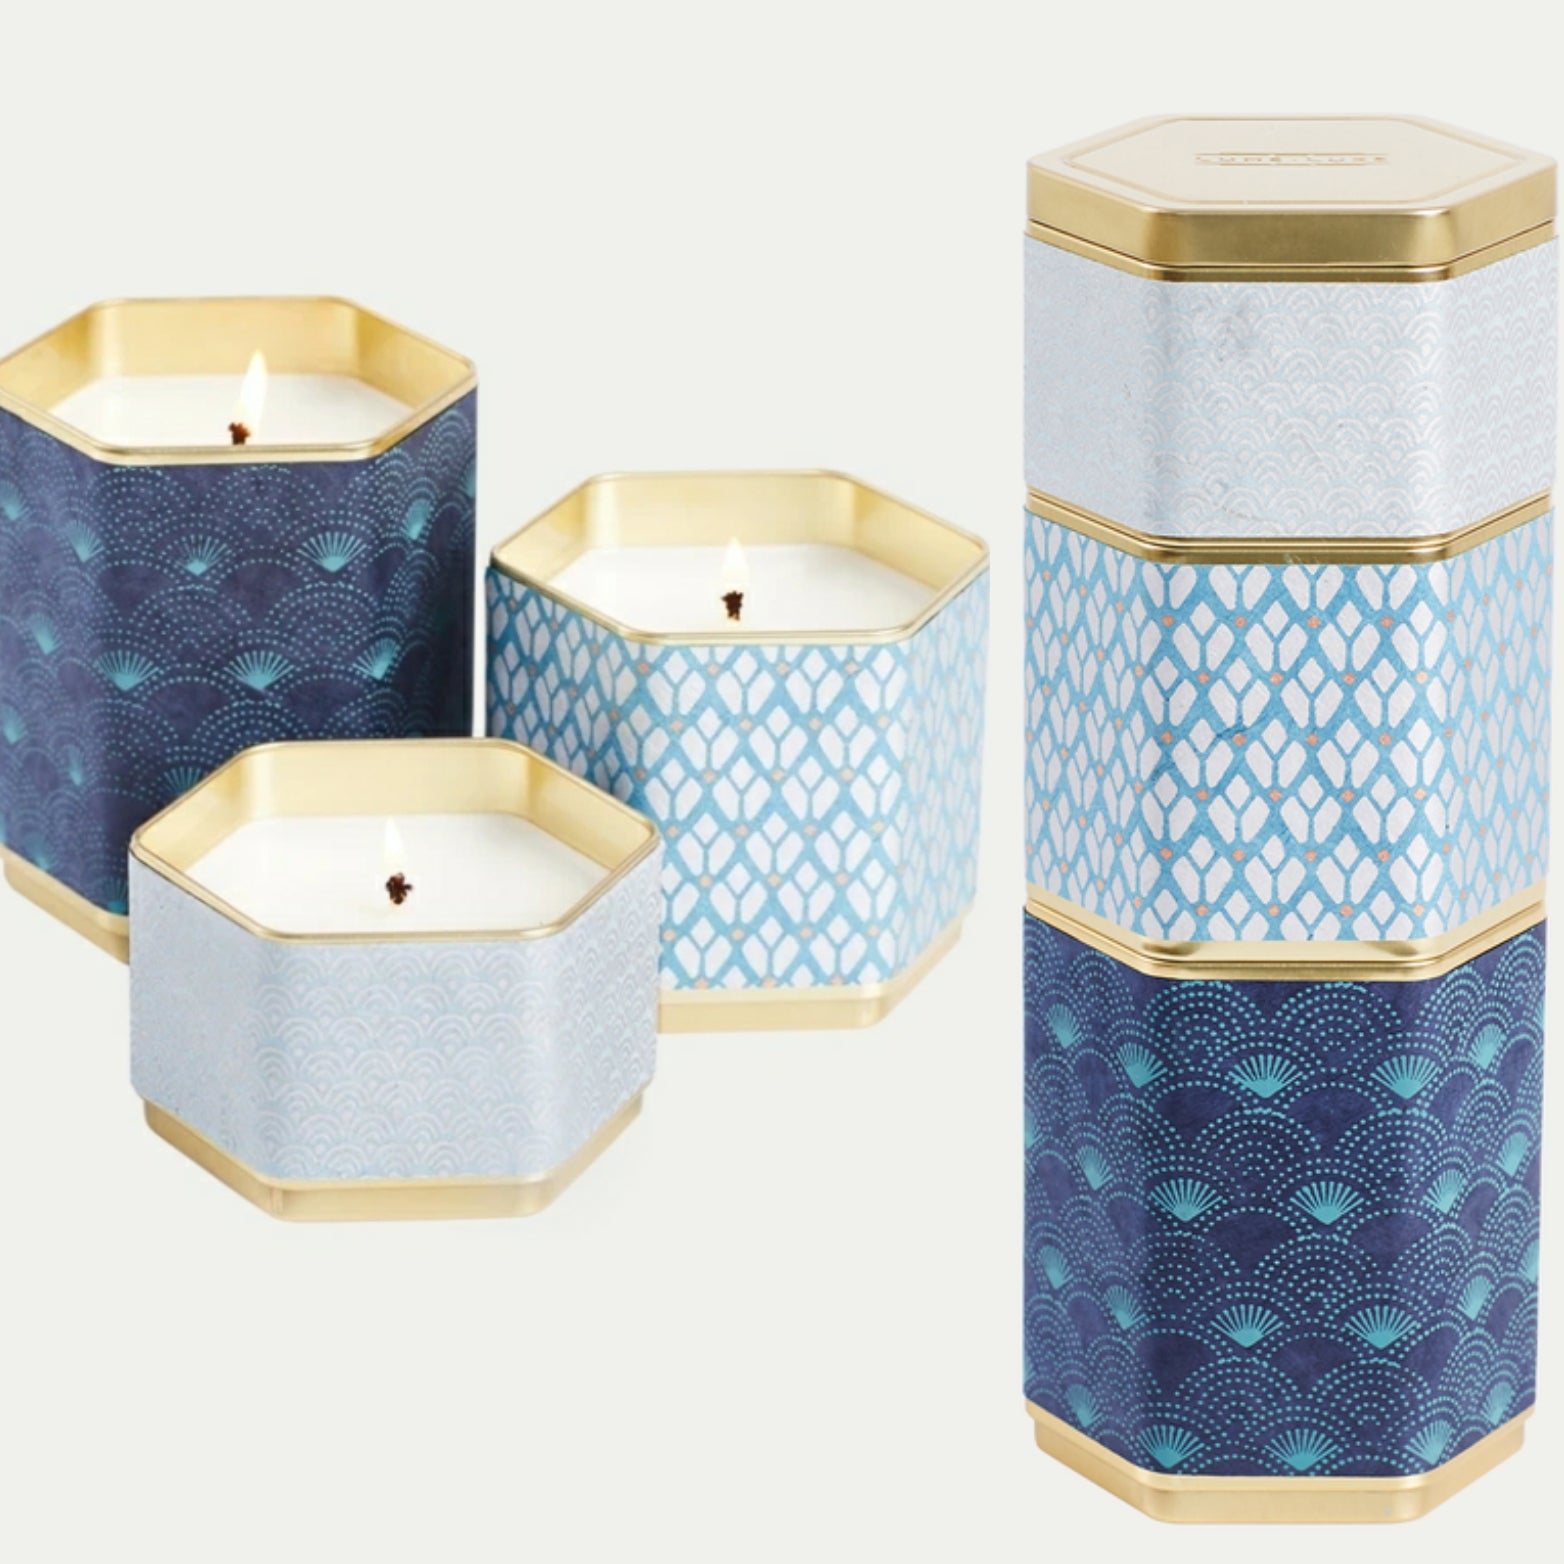 Hexagon Stacking Candles (3)